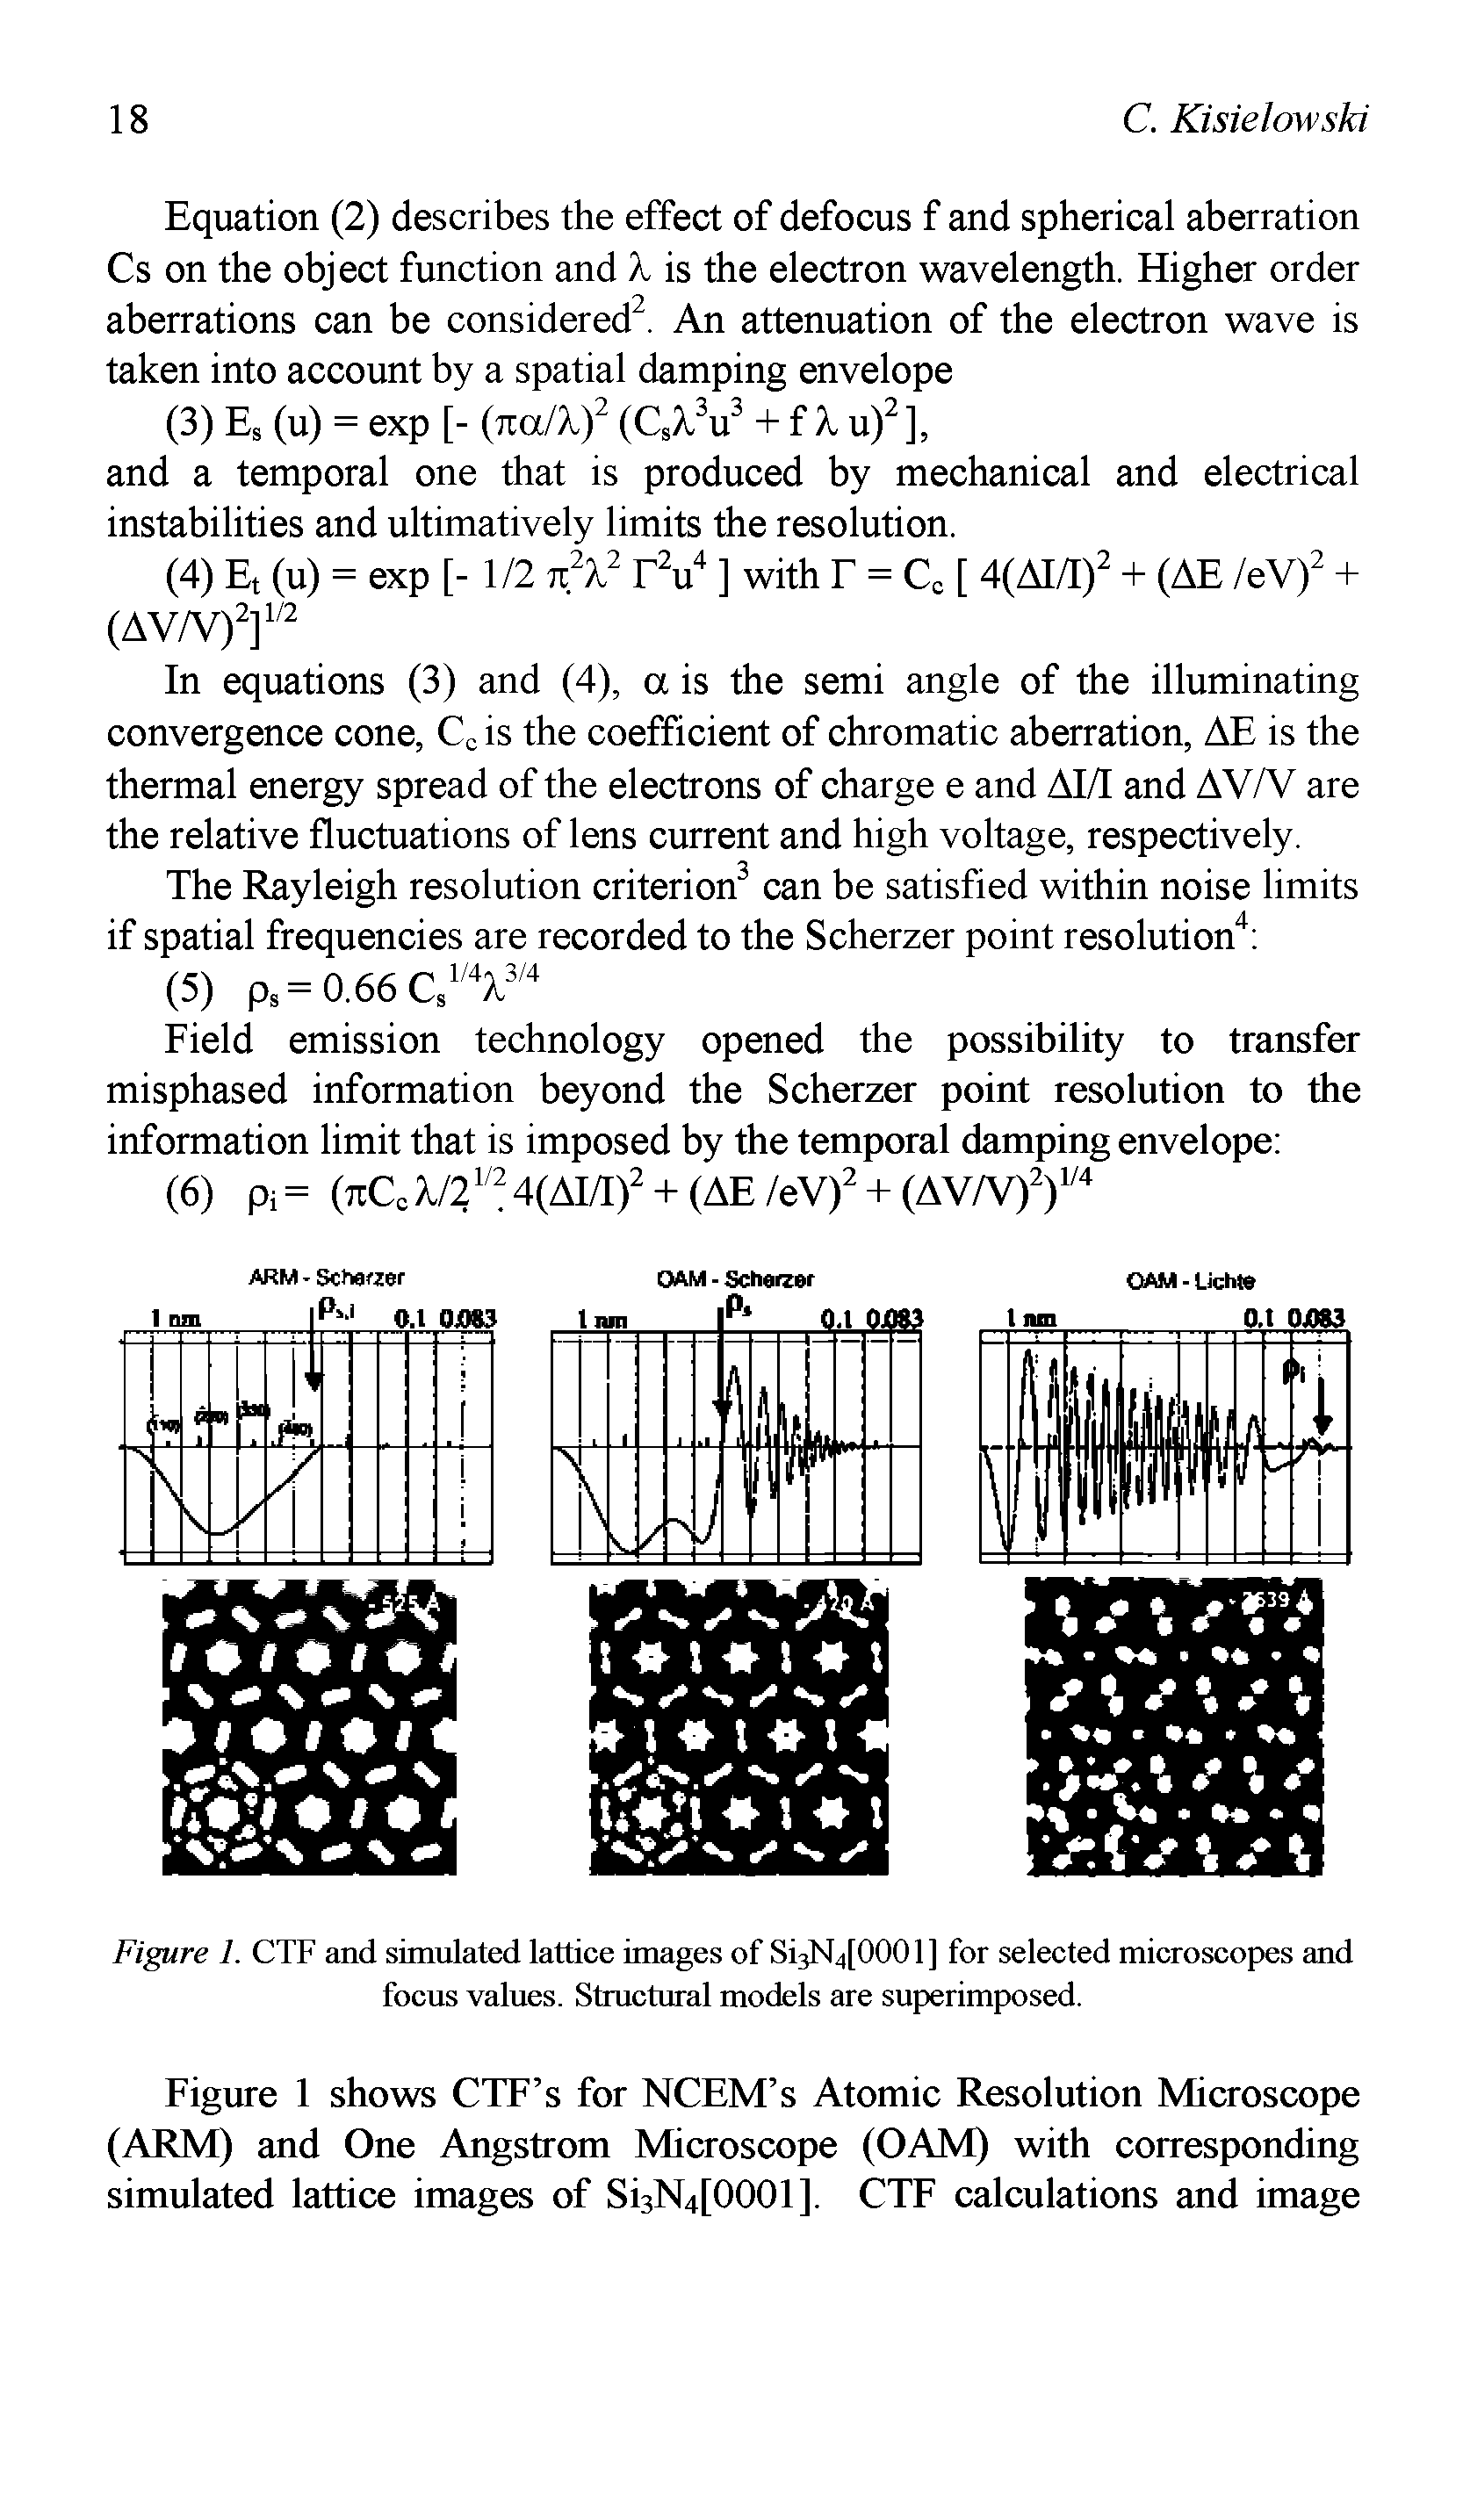 Figure 1. CTF and simulated lattice images of Si3N4[0001 ] for selected microscopes and focus values. Stmctural models are superimposed.